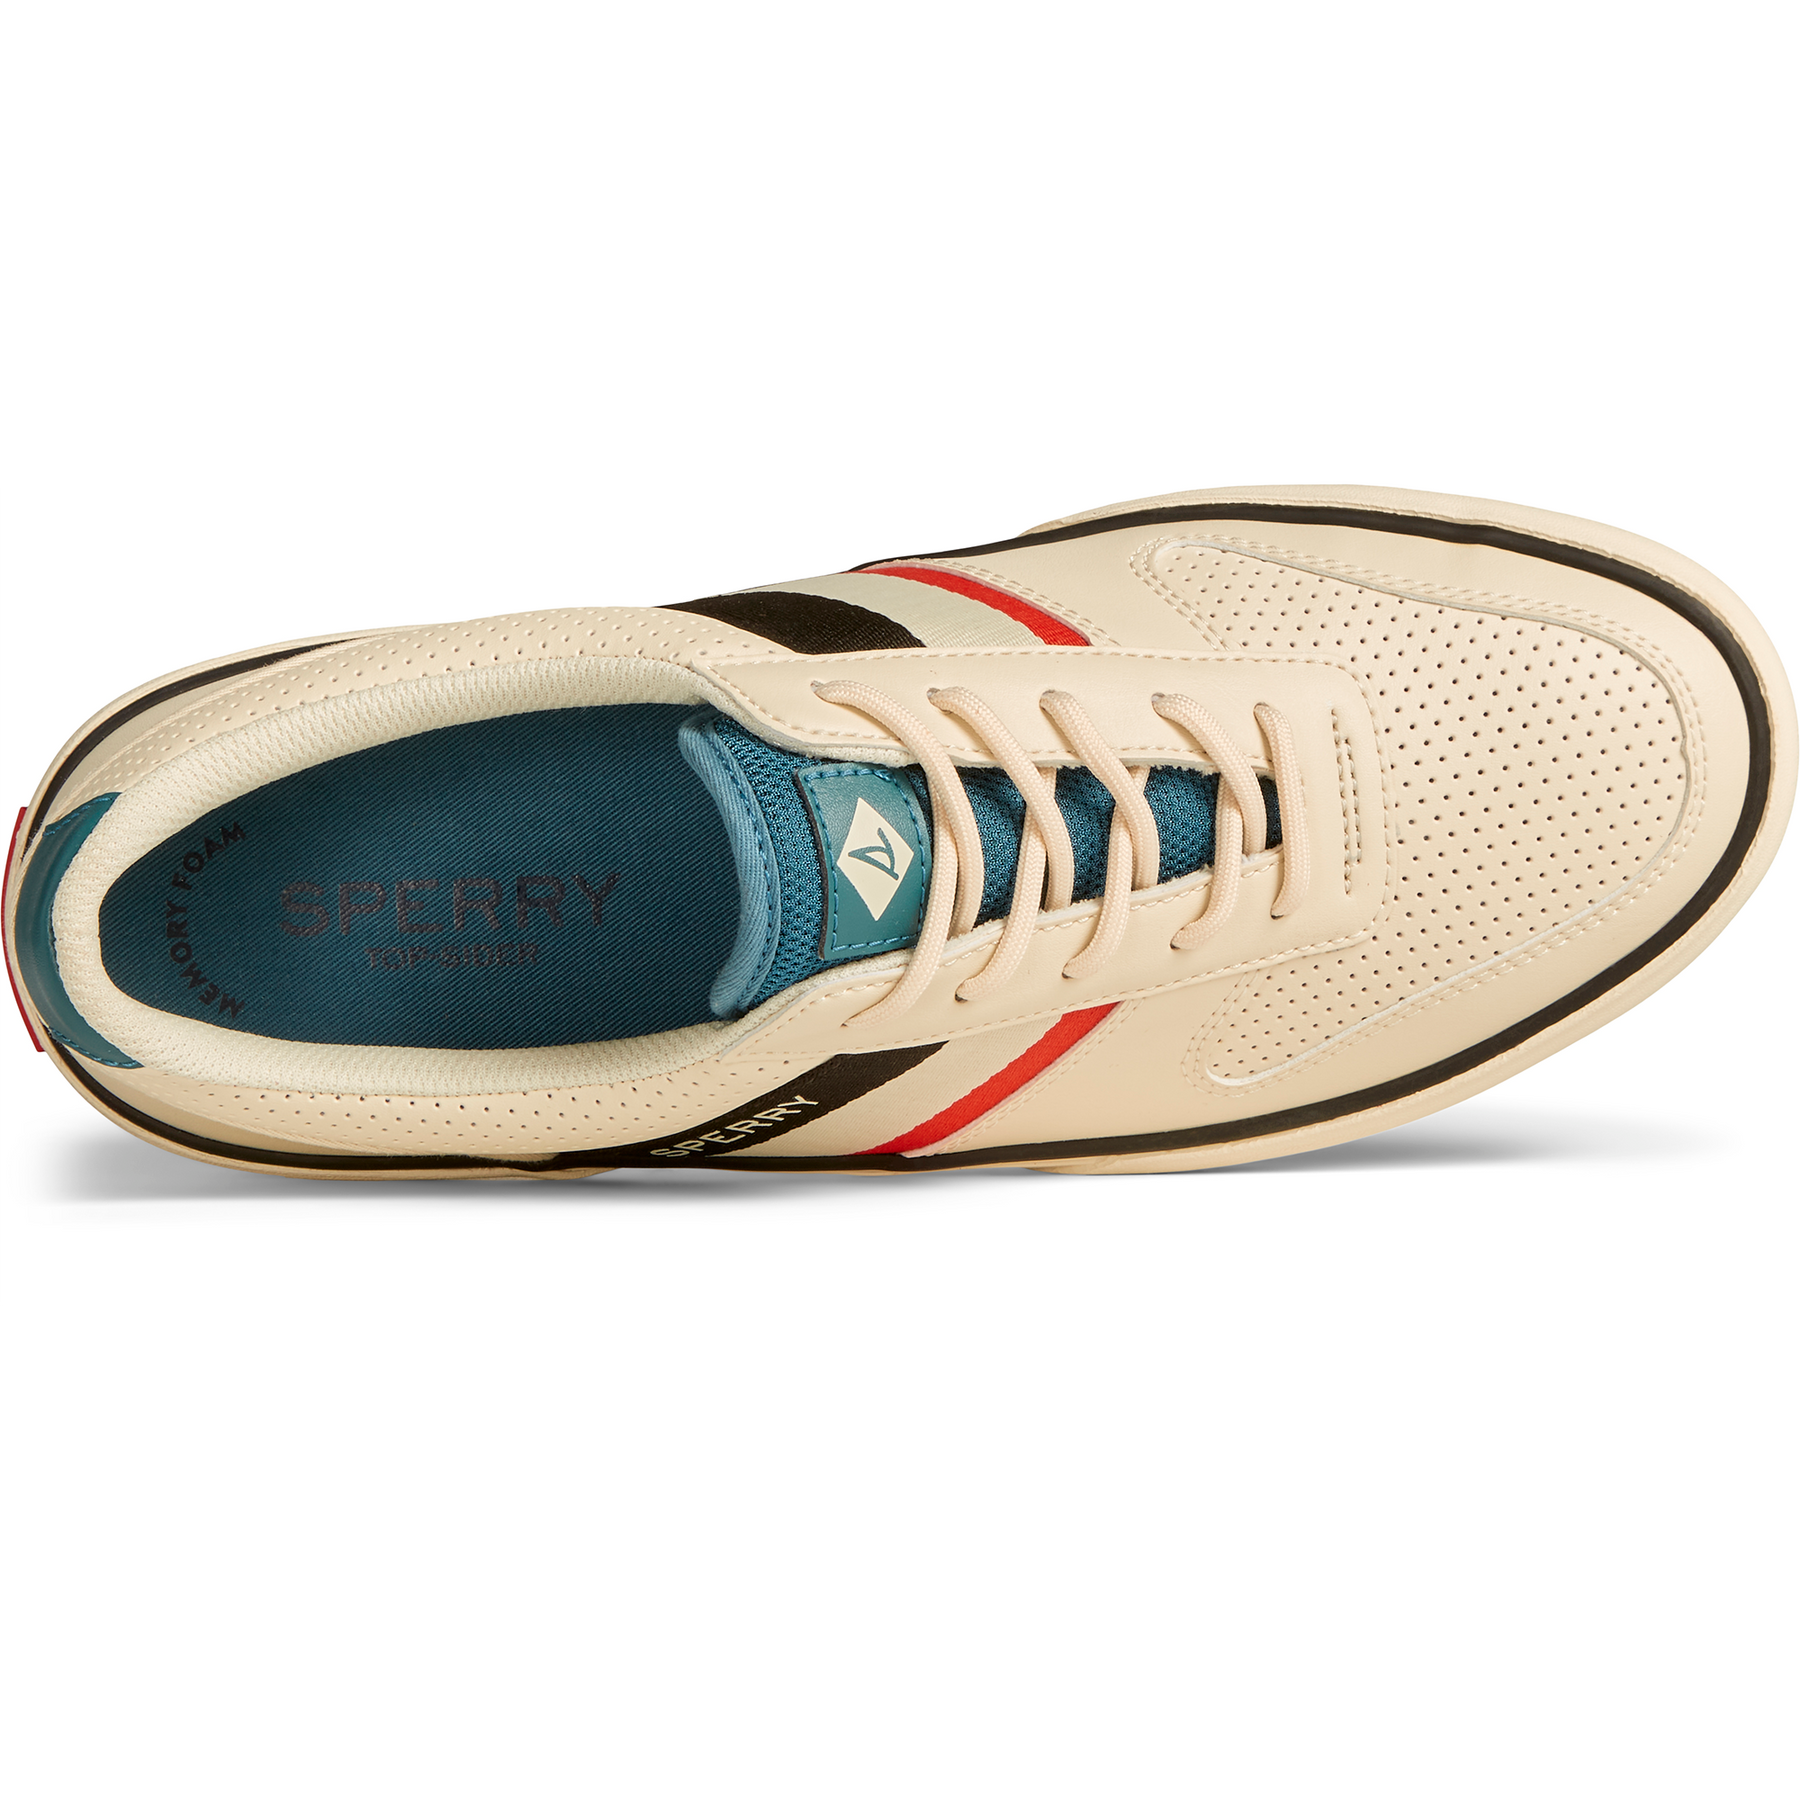 Men's Halyard Retrol Lace Up Tri-Tone Sneaker - Ivory (STS24420)